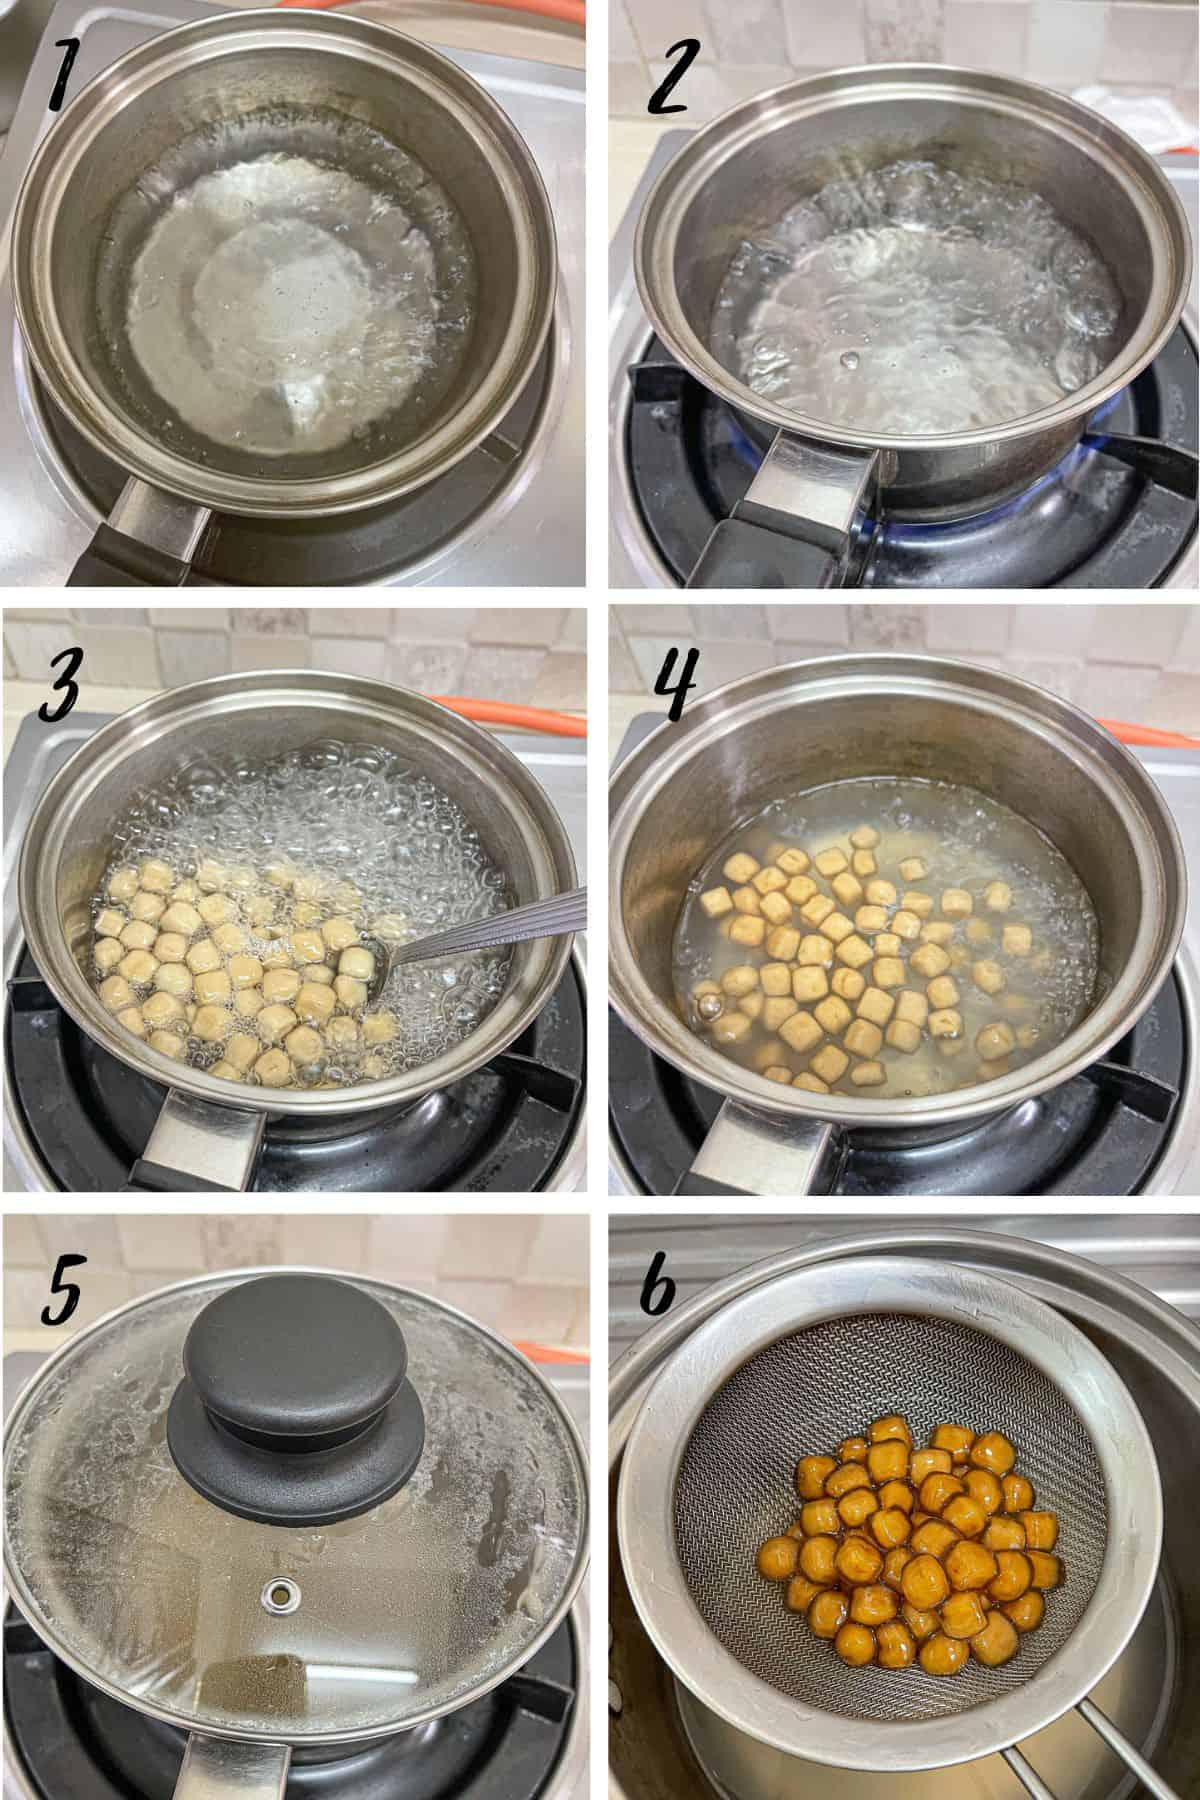 A poster of 6 images showing how to cook tapioca pearls (boba pearls).